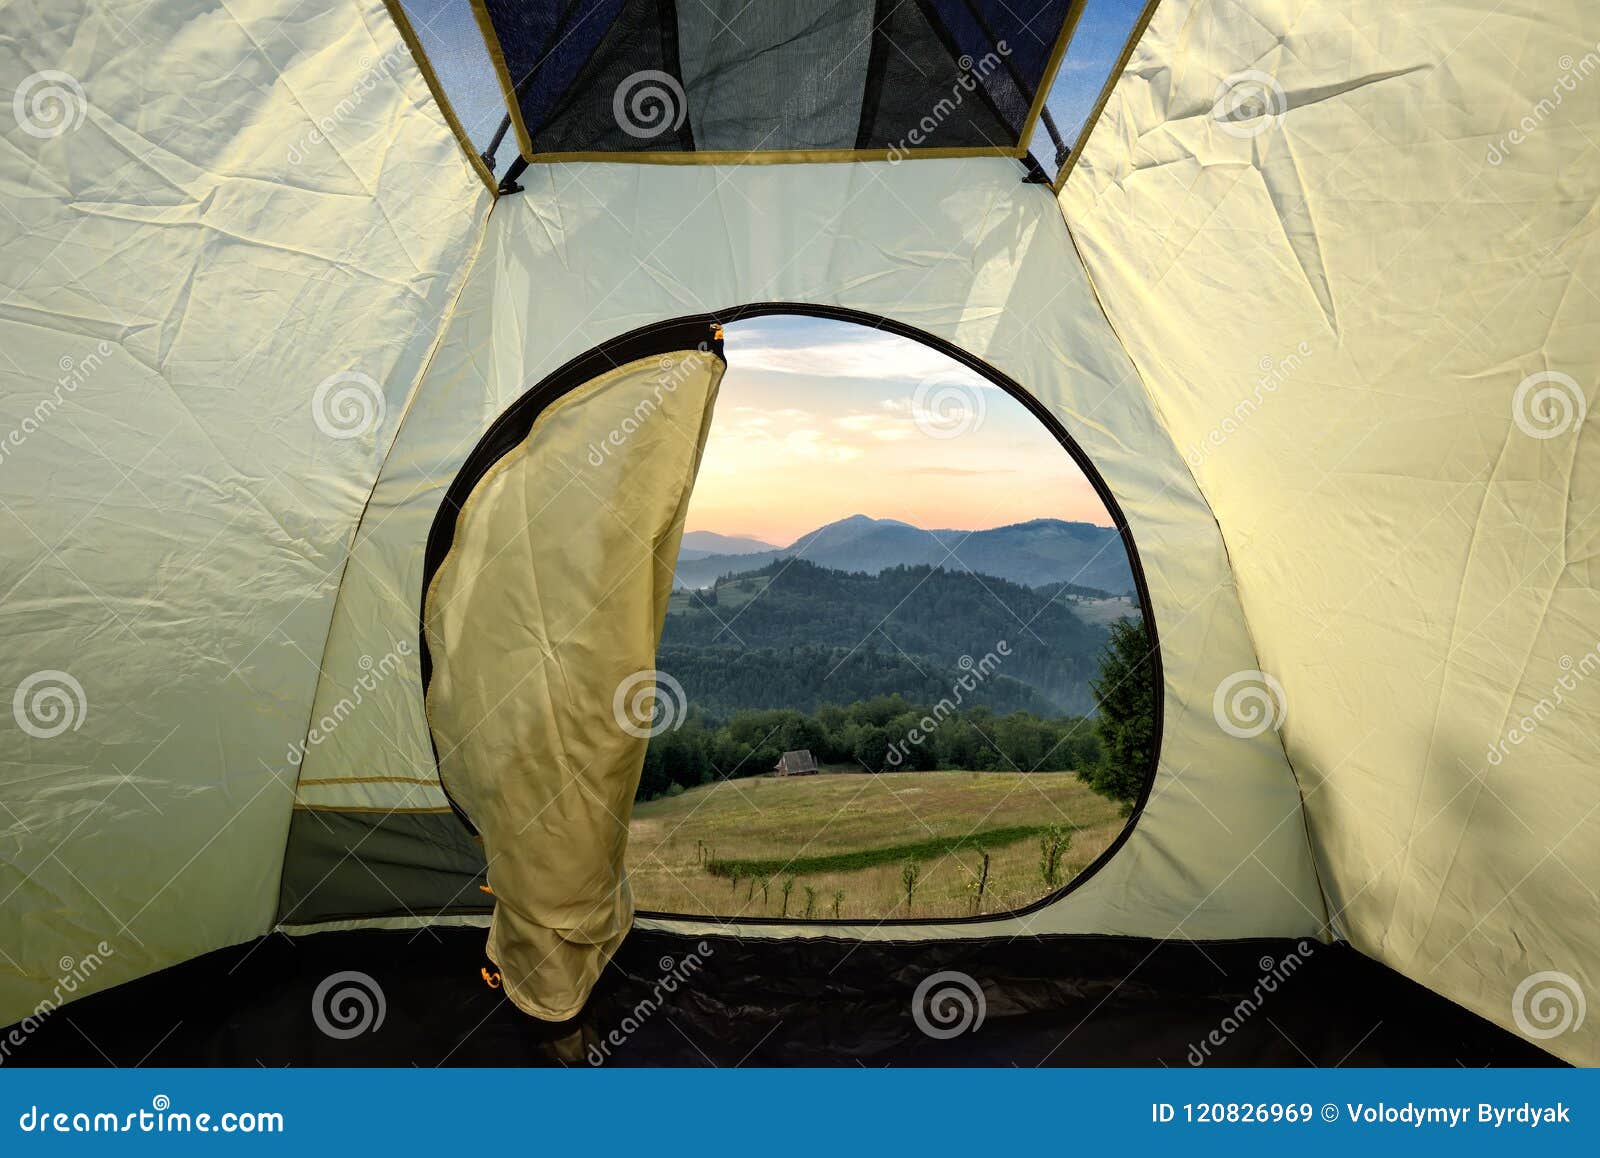 View from Inside a Tent on Mountains Landscape Stock Image - Image of ...